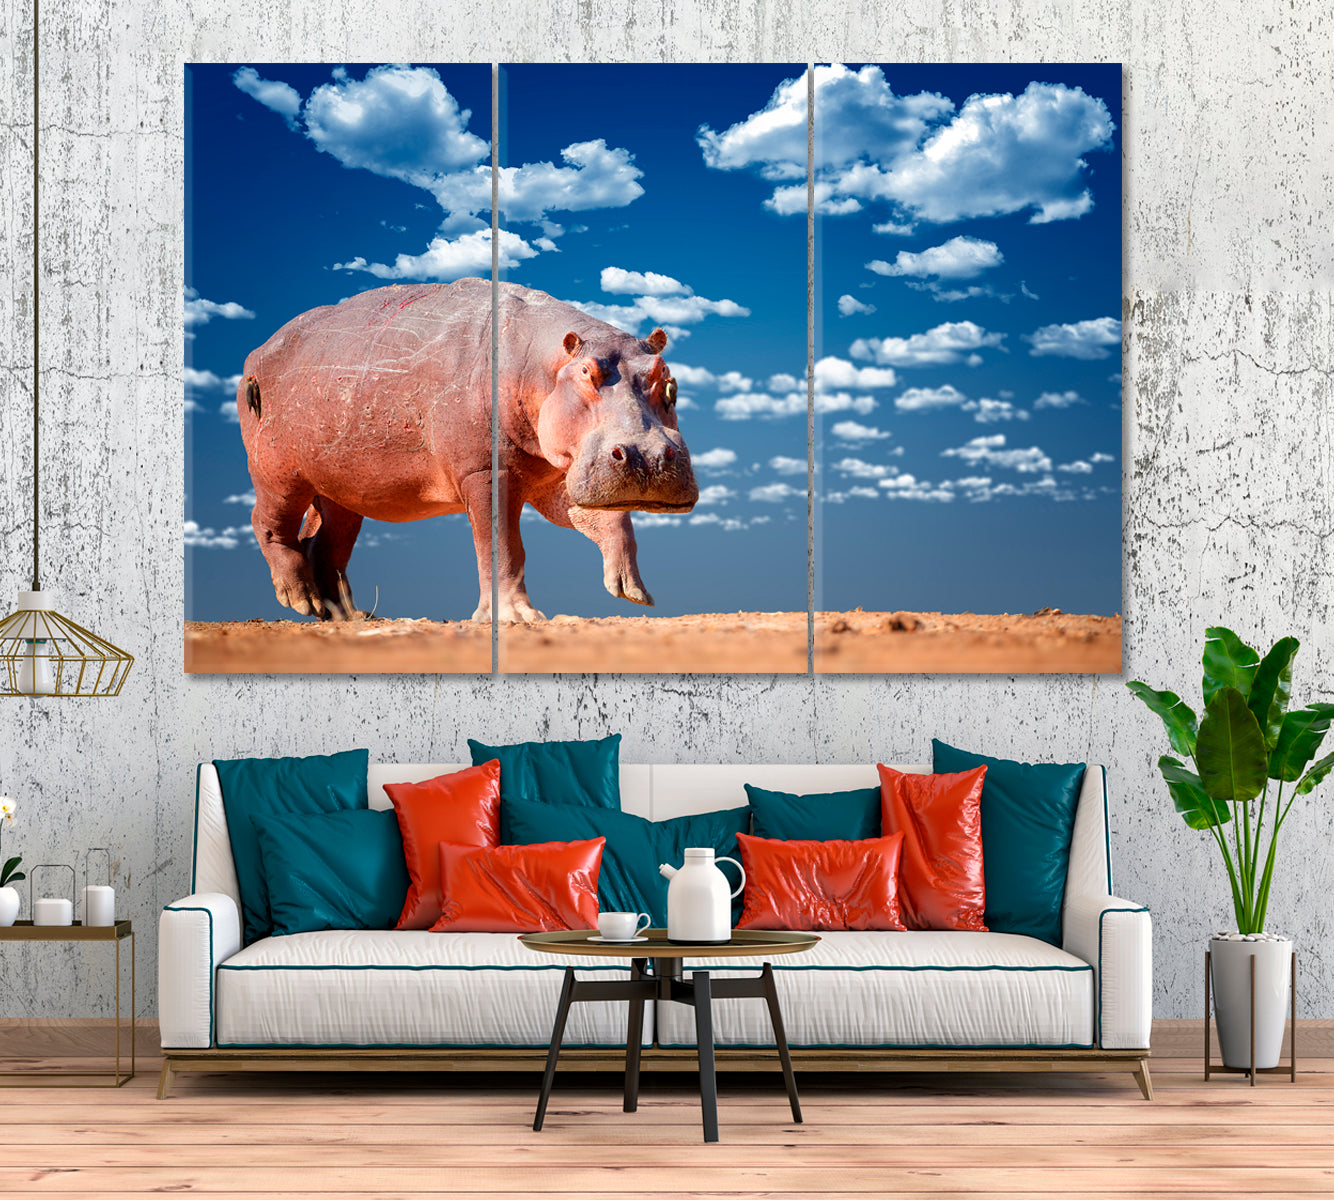 Hippo in Mana Pools National Park Zimbabwe Canvas Print ArtLexy 3 Panels 36"x24" inches 